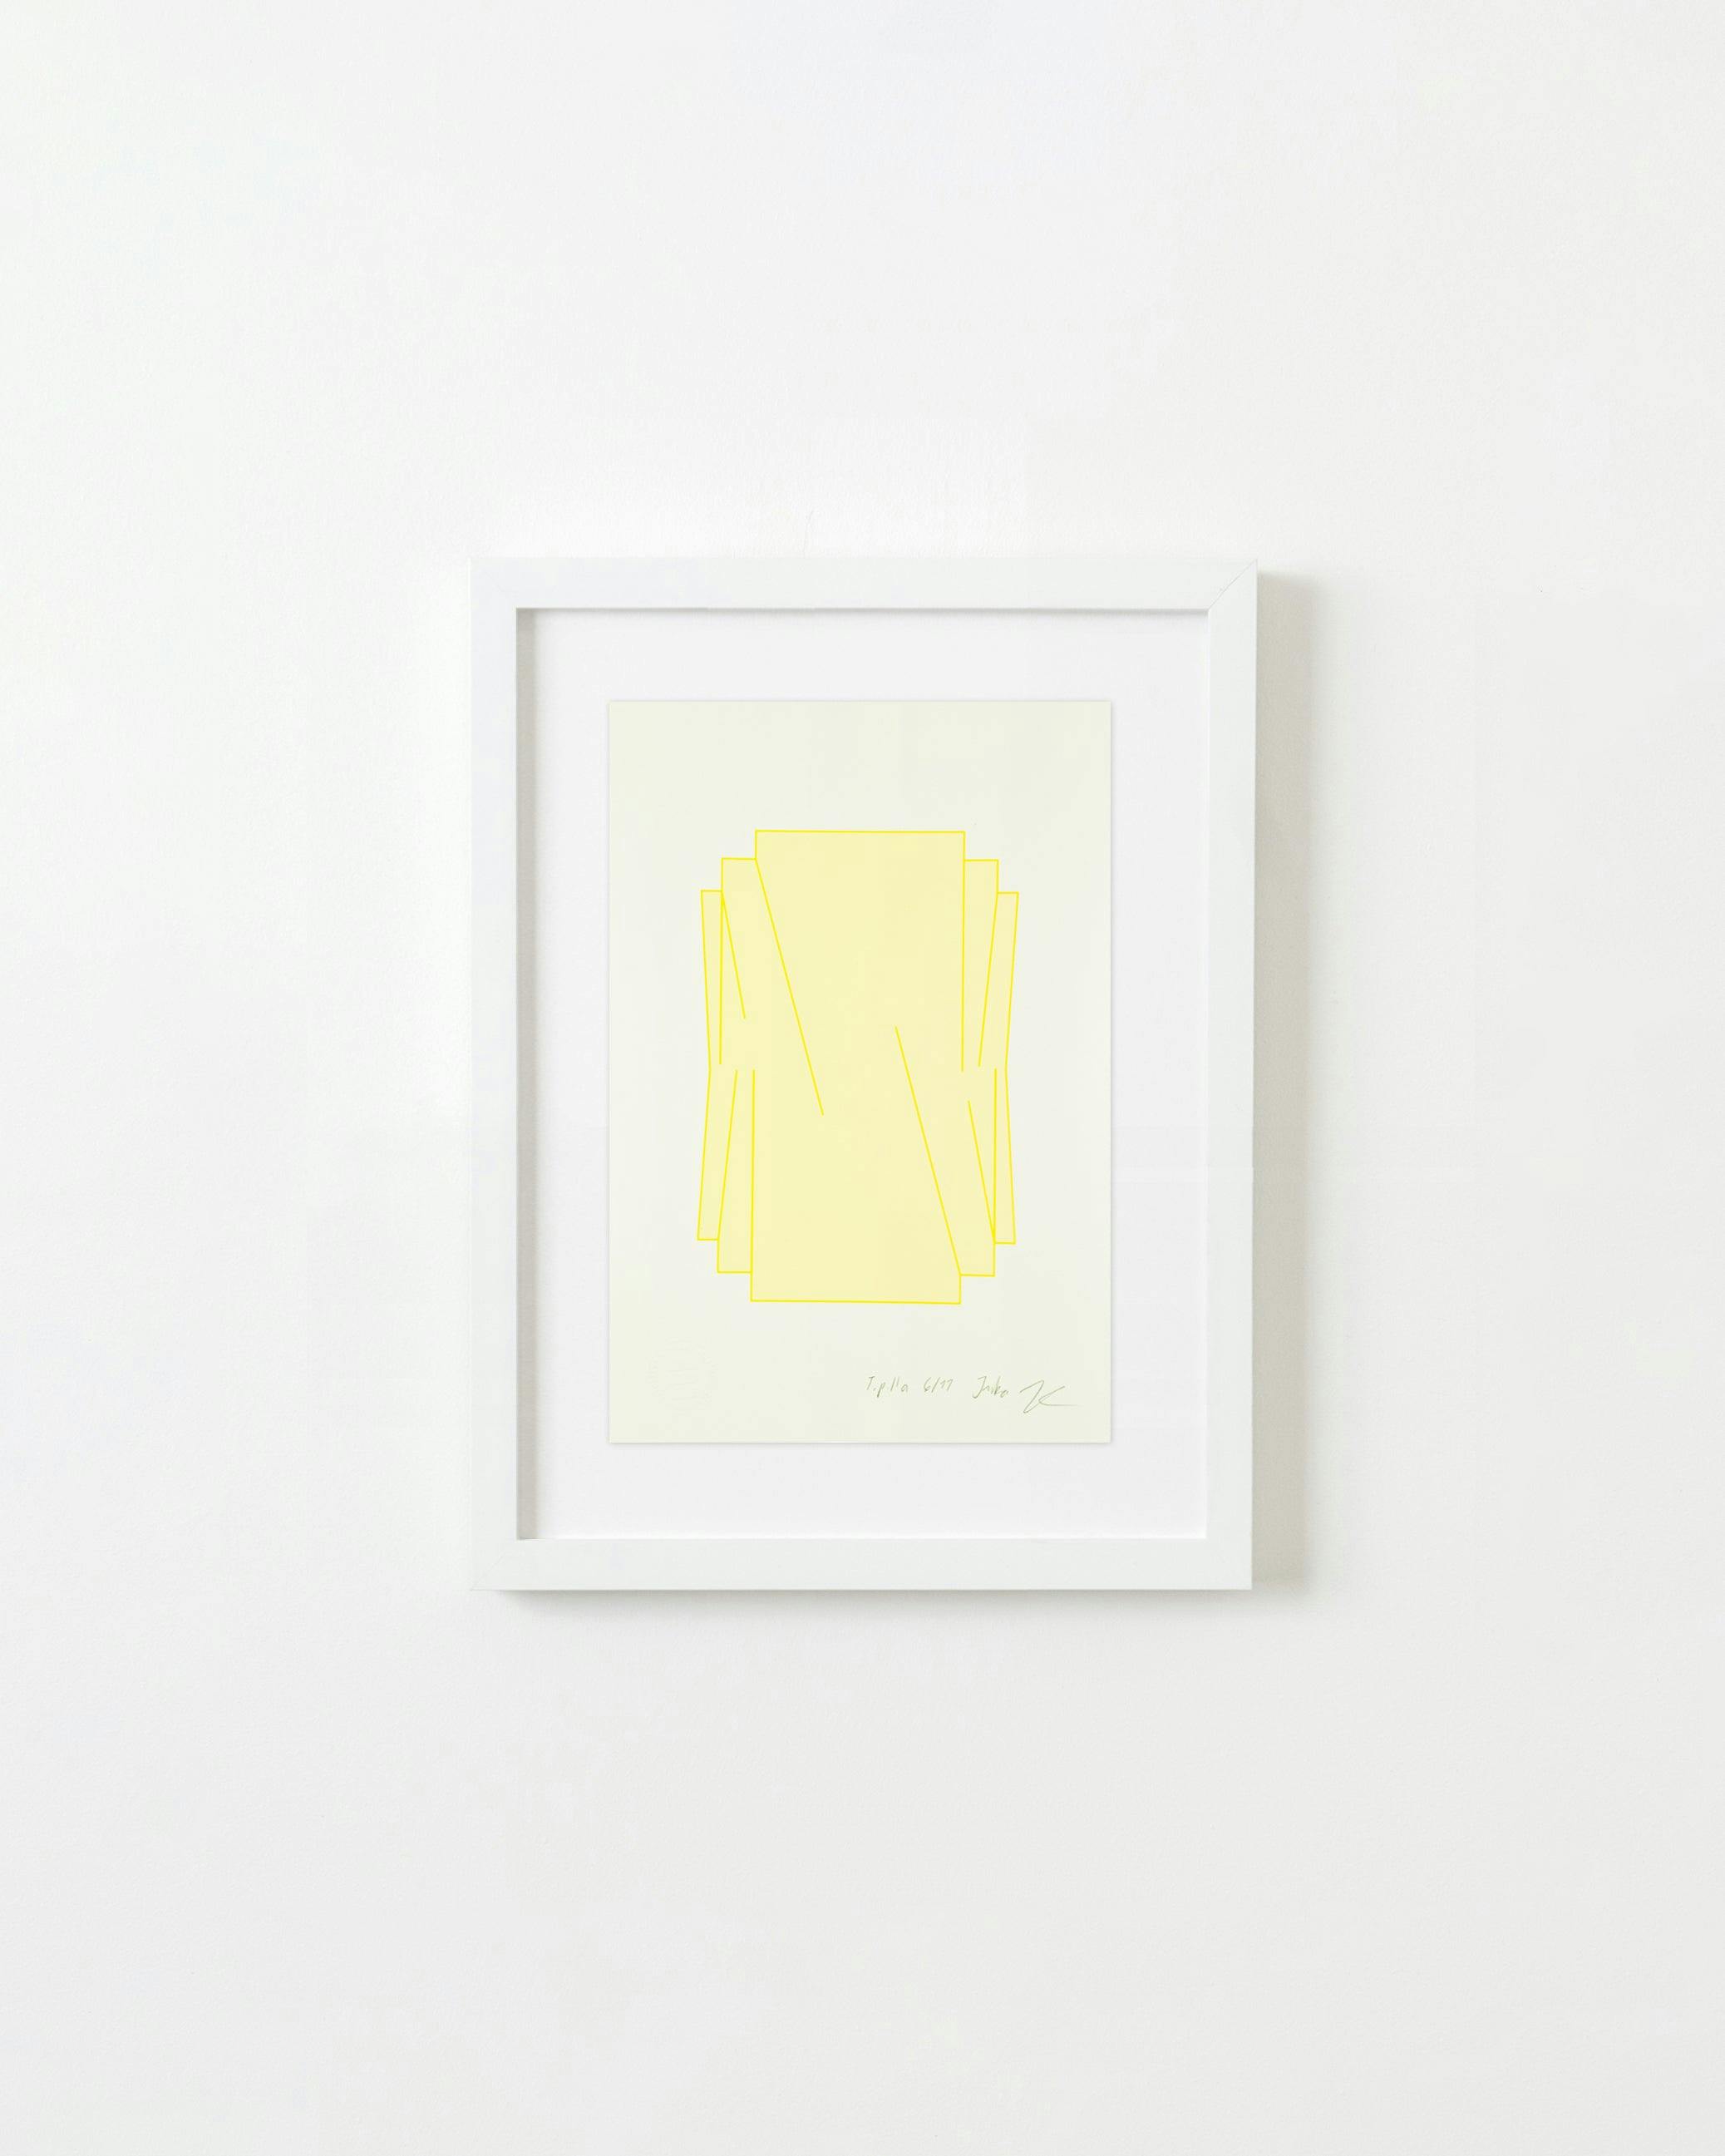 Print by Inka Bell titled "Wrapped III".